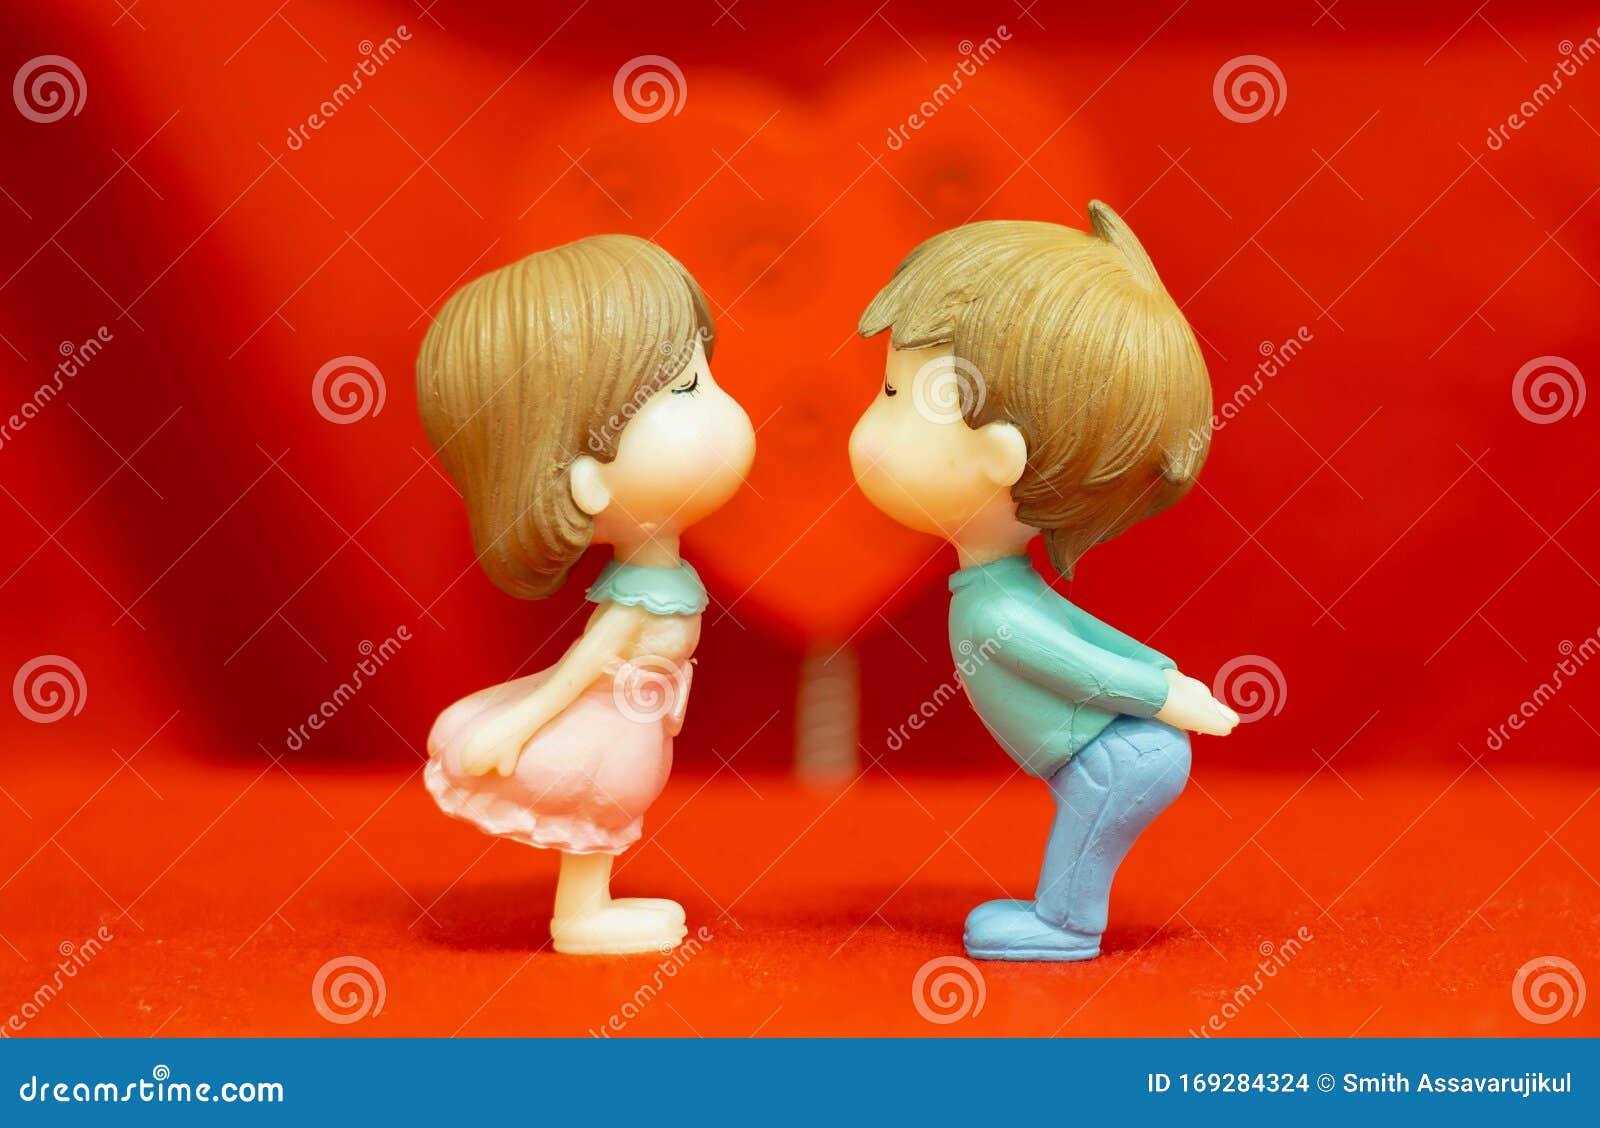 The Miniature Couple Dolls Boy and Girl Romantic Kiss on Red Heart ...